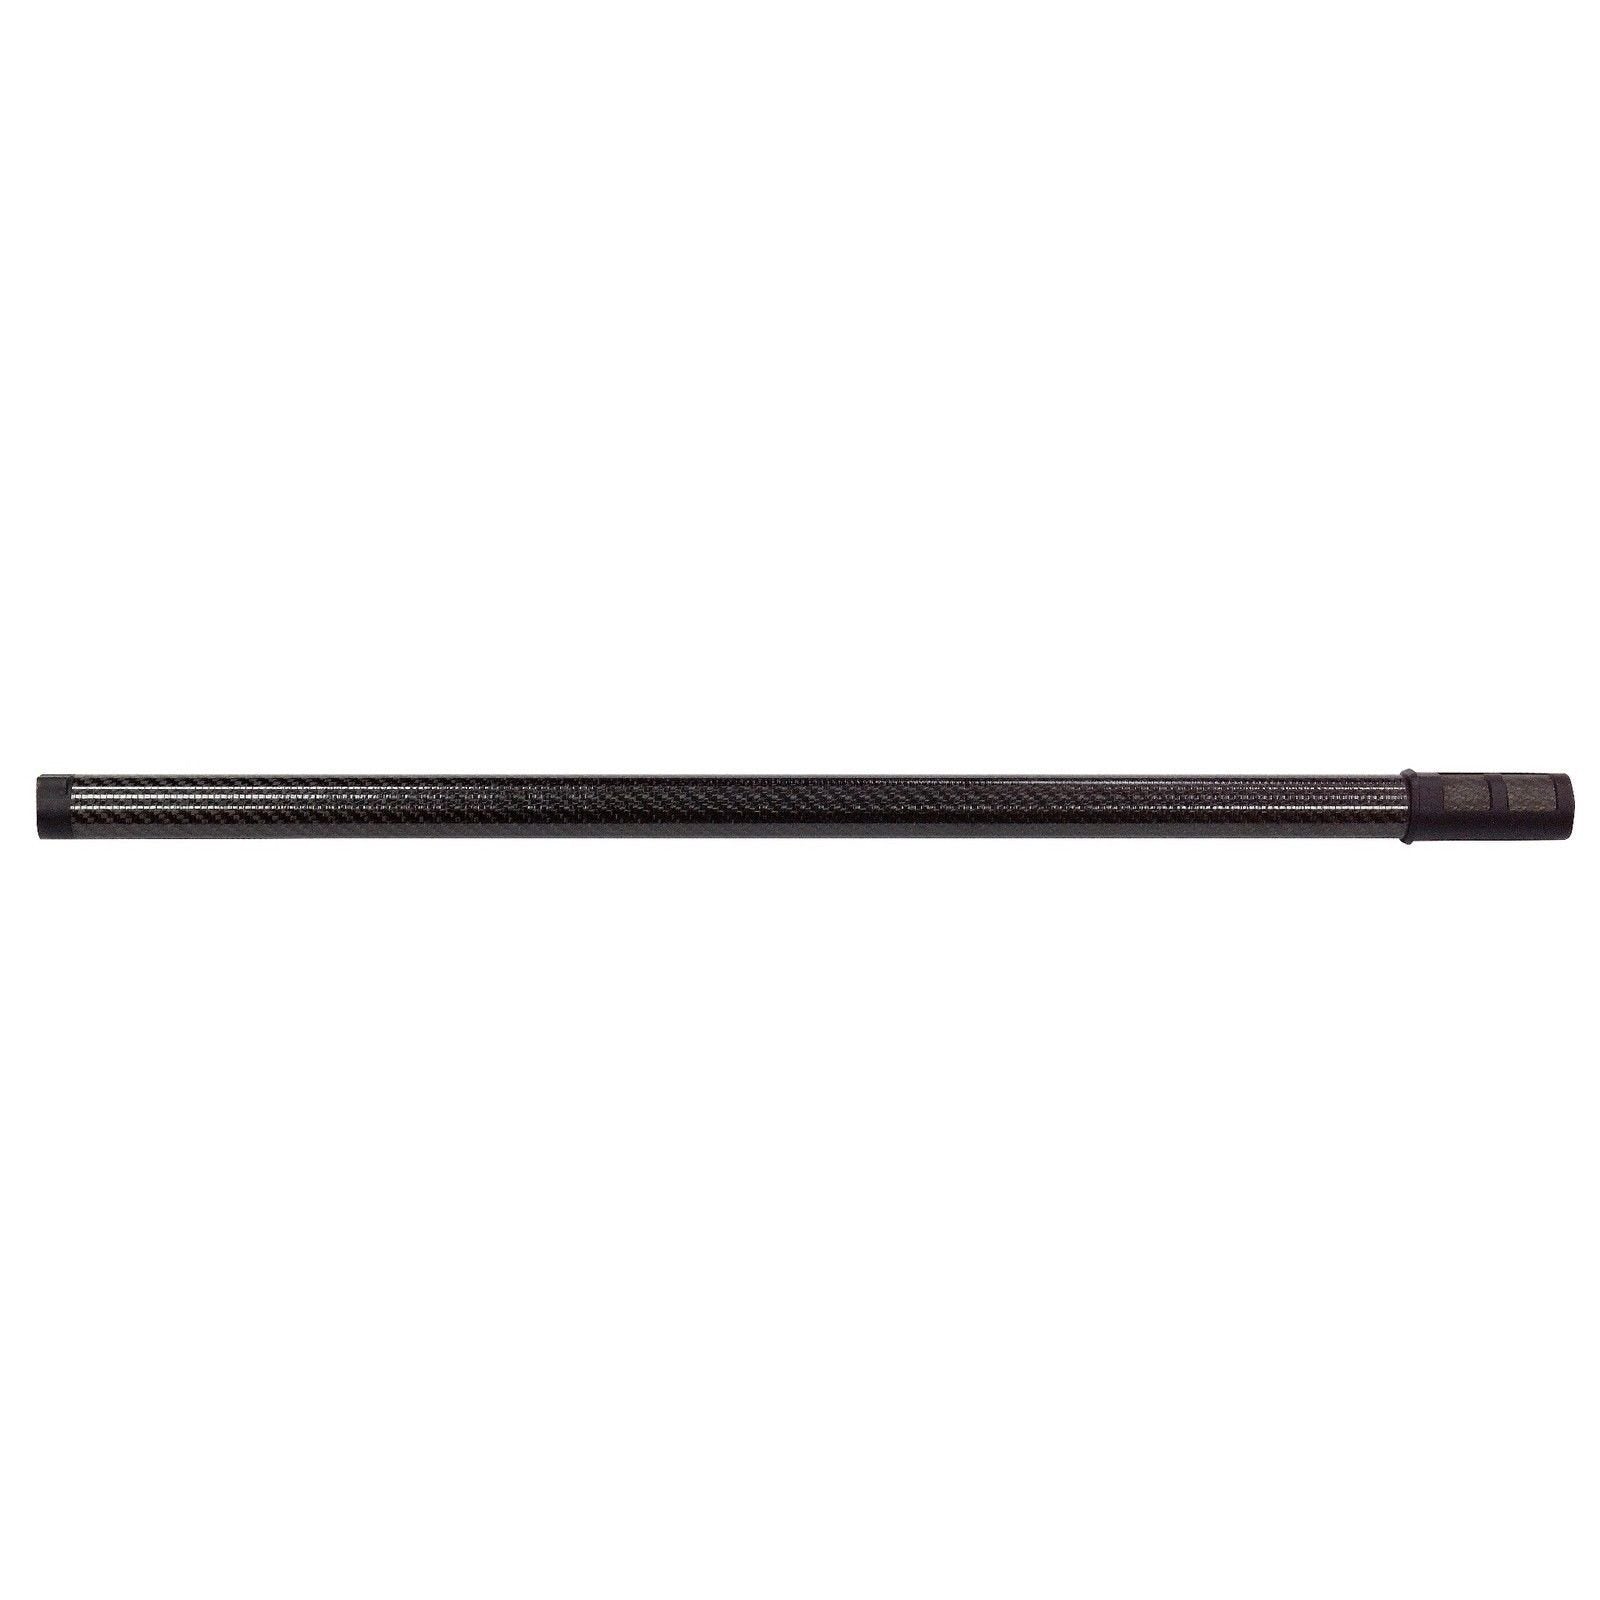 Minelab Replacement Middle Rod for GPZ 7000 Metal Detector